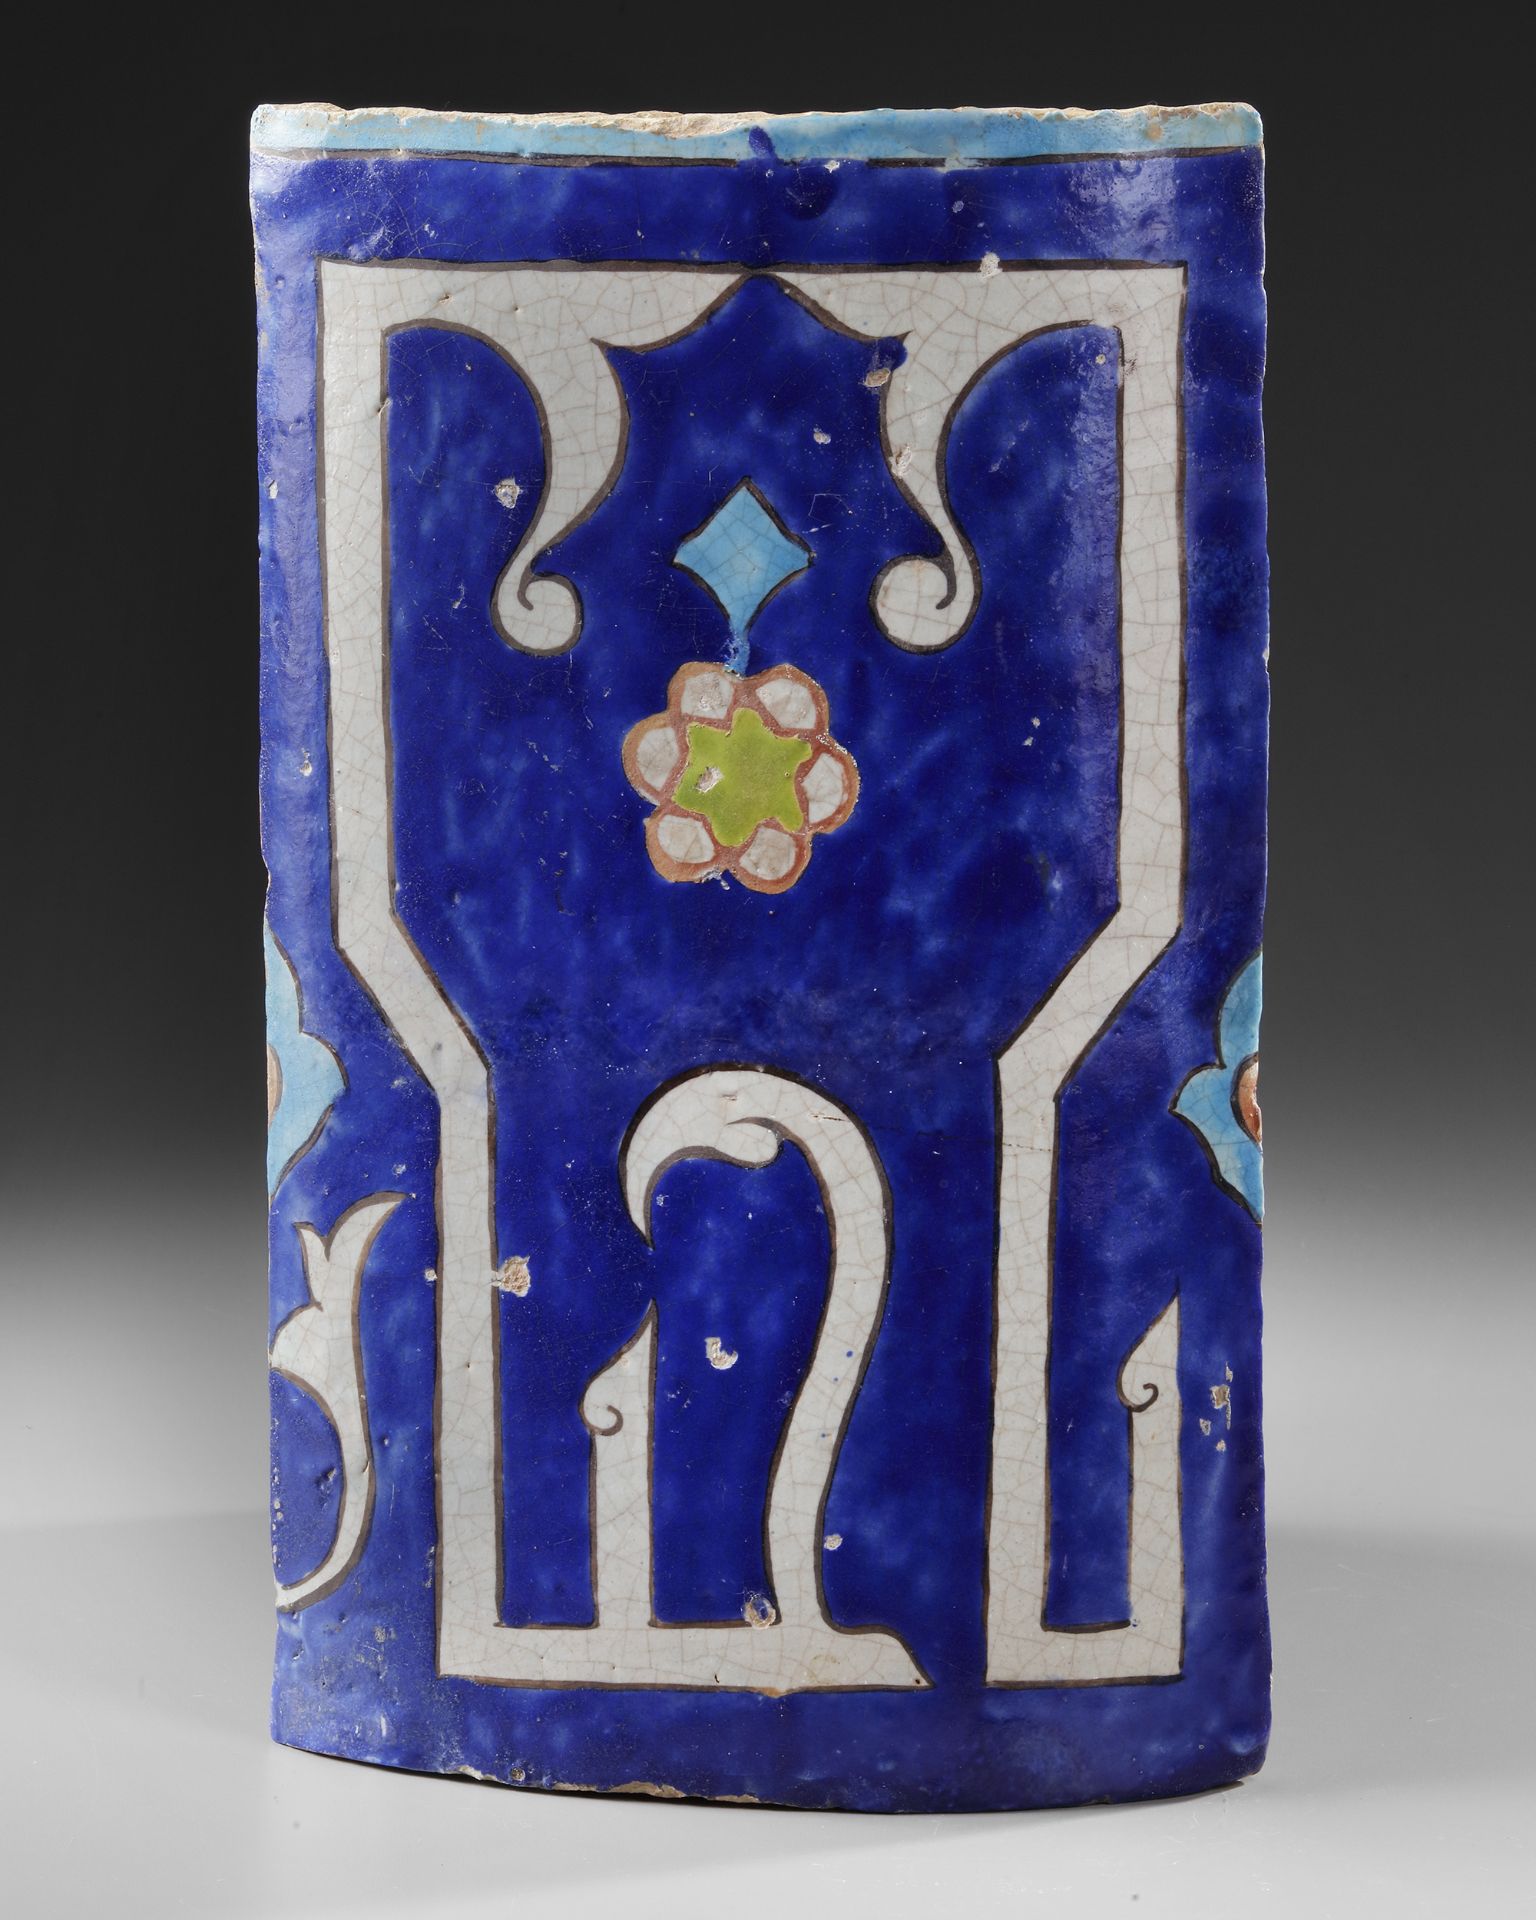 A TIMURID CALLIGRAPHIC POTTERY TILE, CENTRAL ASIA OR EASTERN PERSIA, 14TH-15TH CENTURY - Image 4 of 10